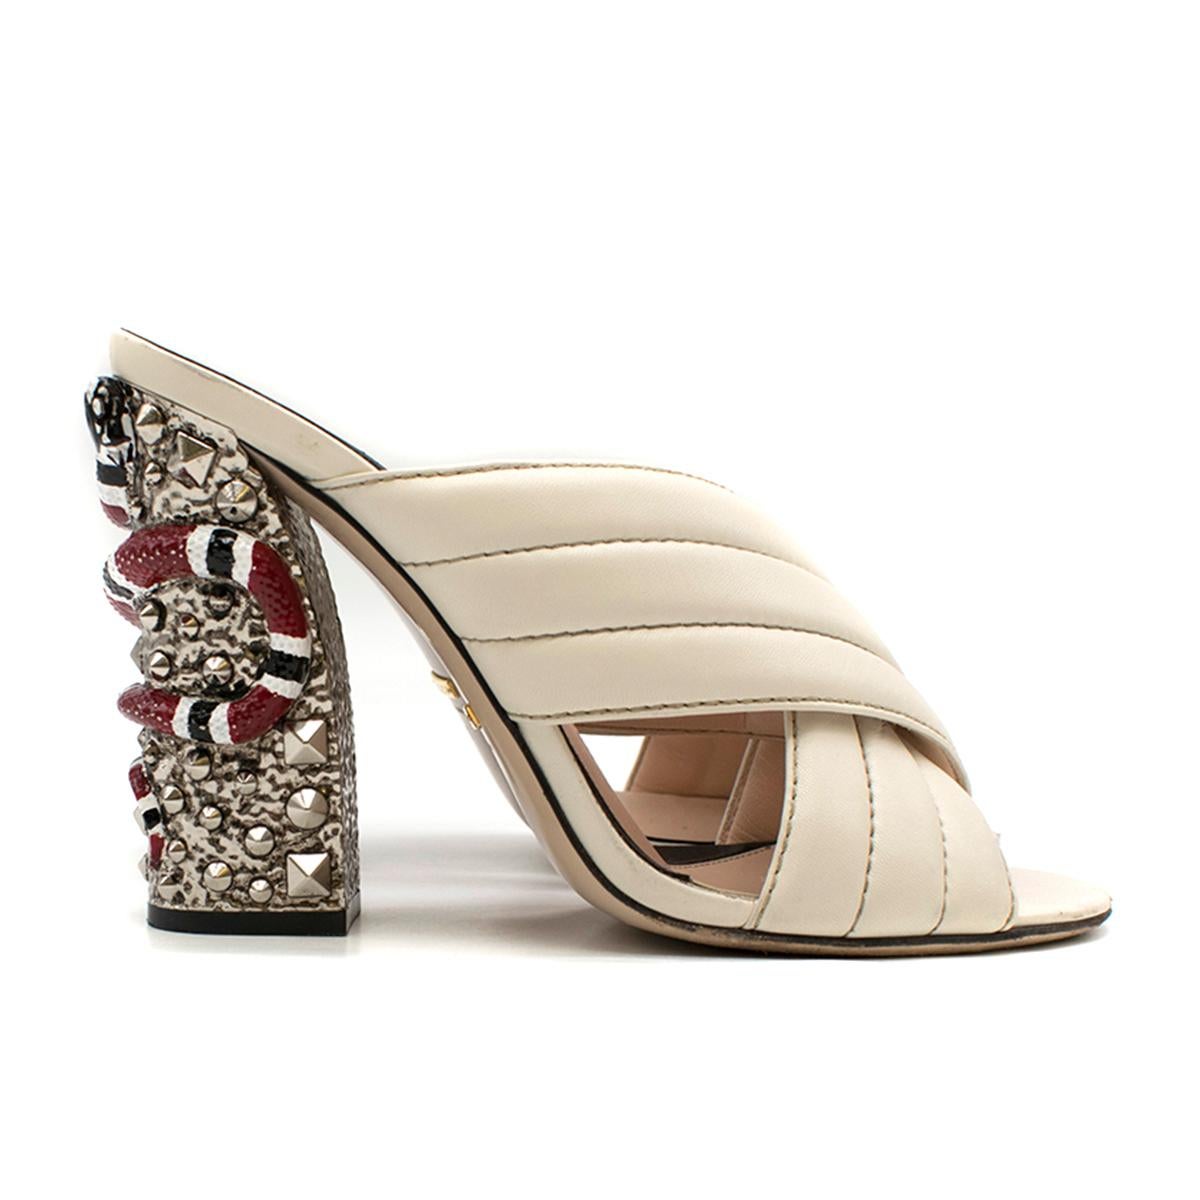 Gucci Webby Quilted Leather Snake-Heel Mule Sandal

- 'Webby' Mule Sandal 
- Handpainted Snake and Stud block heel 
- Quilted CrissCross vamp strap at front 
- Open toe.
- Slide style.
- Smooth outsole.
- Leather 

Please note, these items are